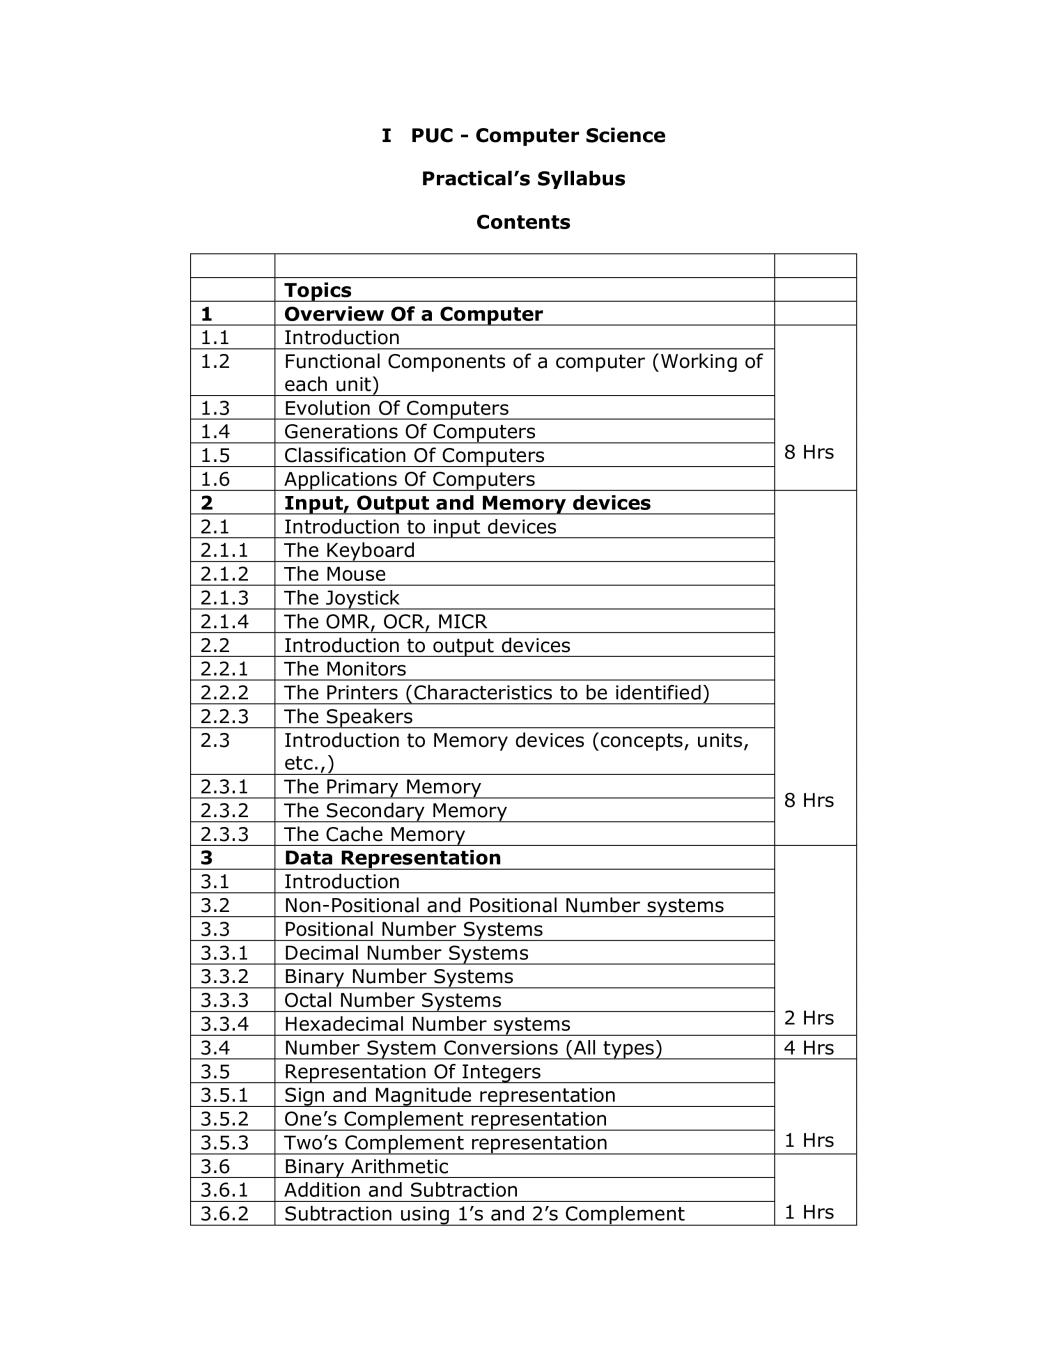 1st PUC Syllabus for Computer Science - Page 1